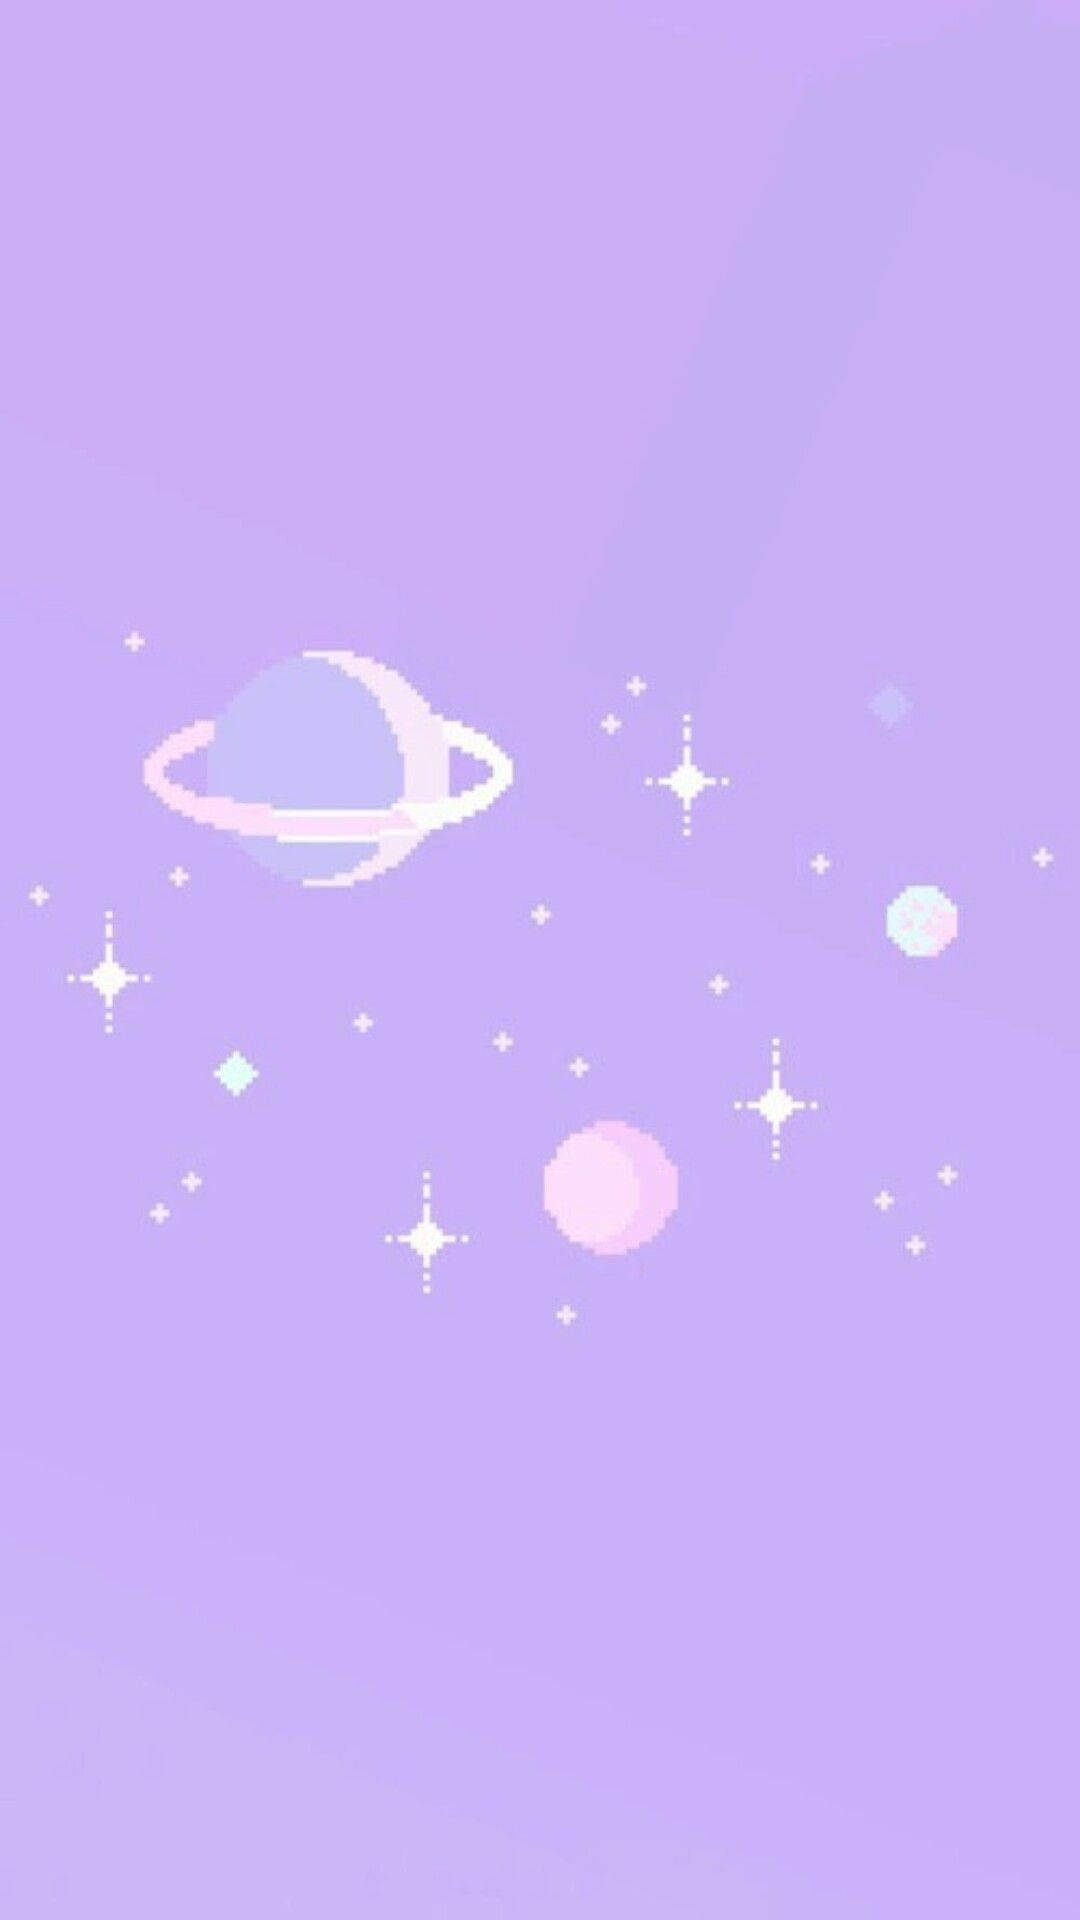 Pixelated Planets Over Light Purple Iphone Background